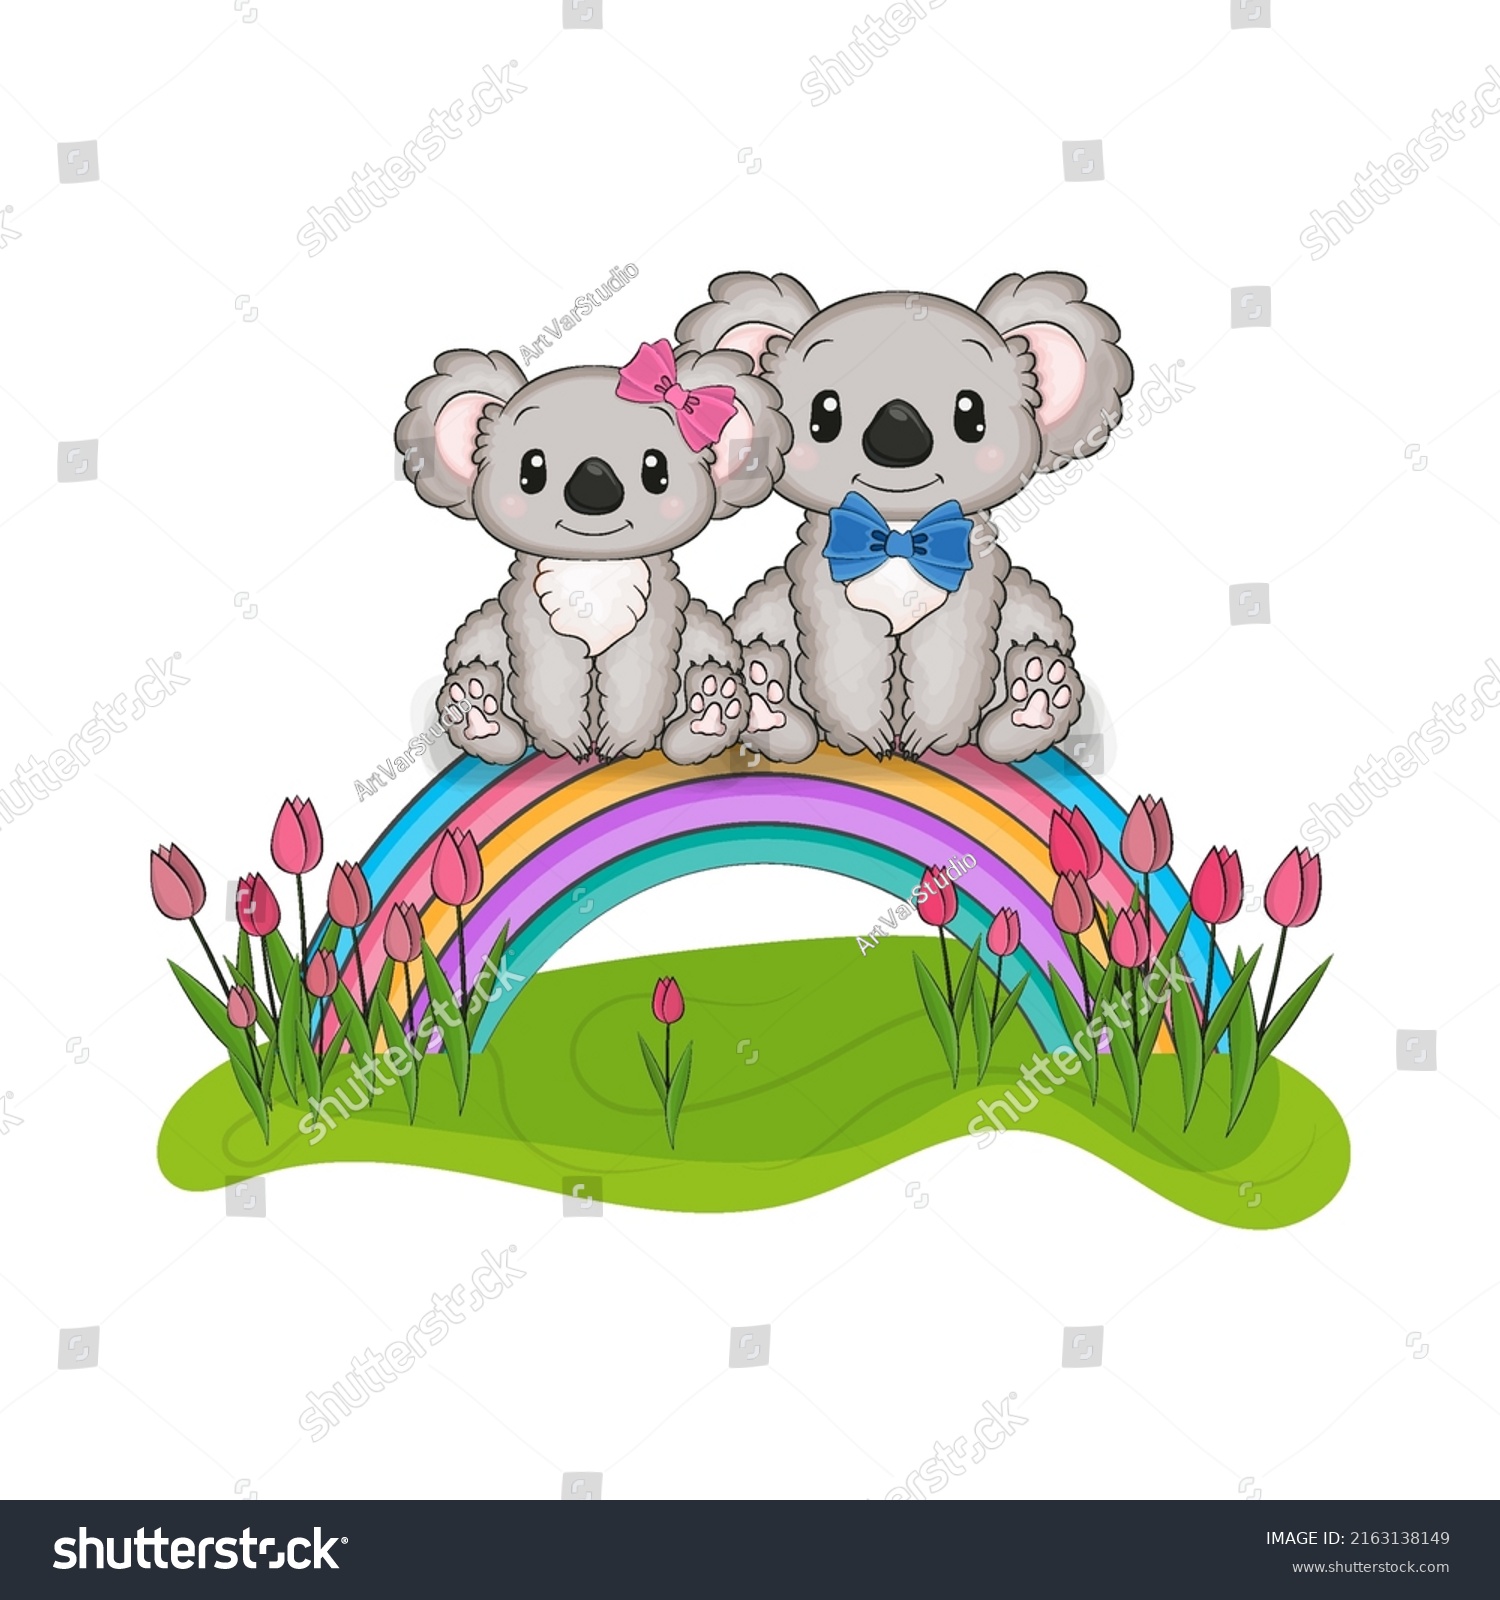 SVG of Two cute koalas are sitting on a rainbow. Vector illustration of a cute animal. Cute little illustration of koala for kids, baby book, fairy tales, covers, baby shower invitation, textile t-shirt. svg